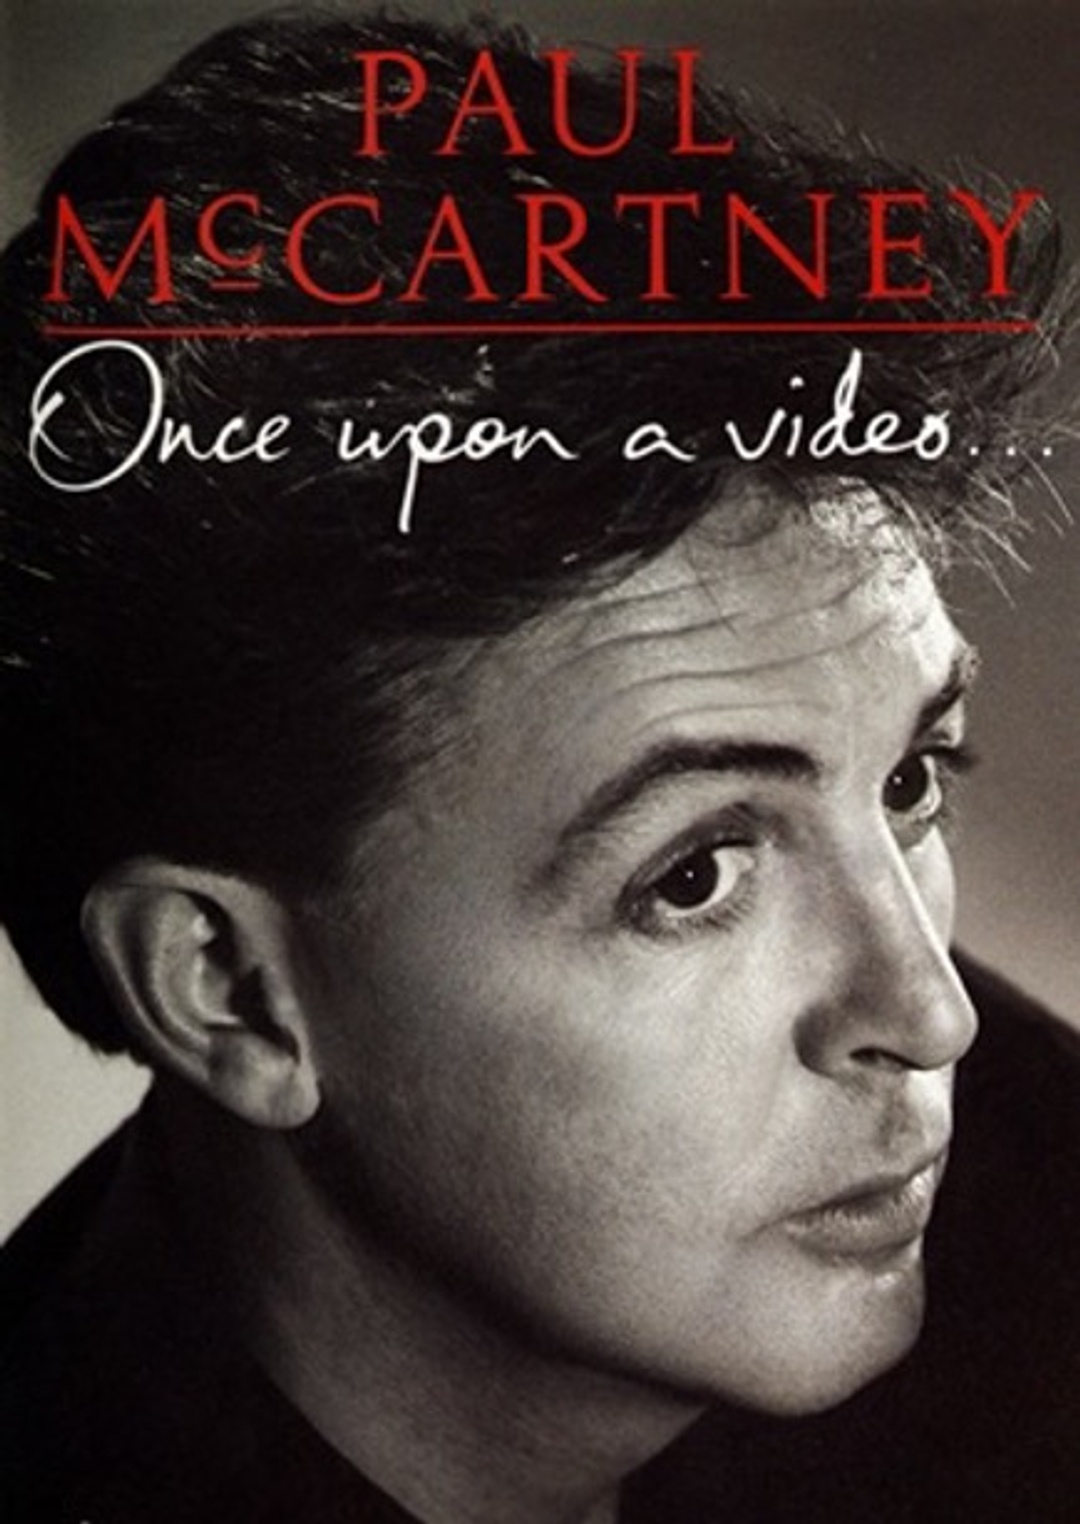 Film cover for Paul McCartney Once upon a video 